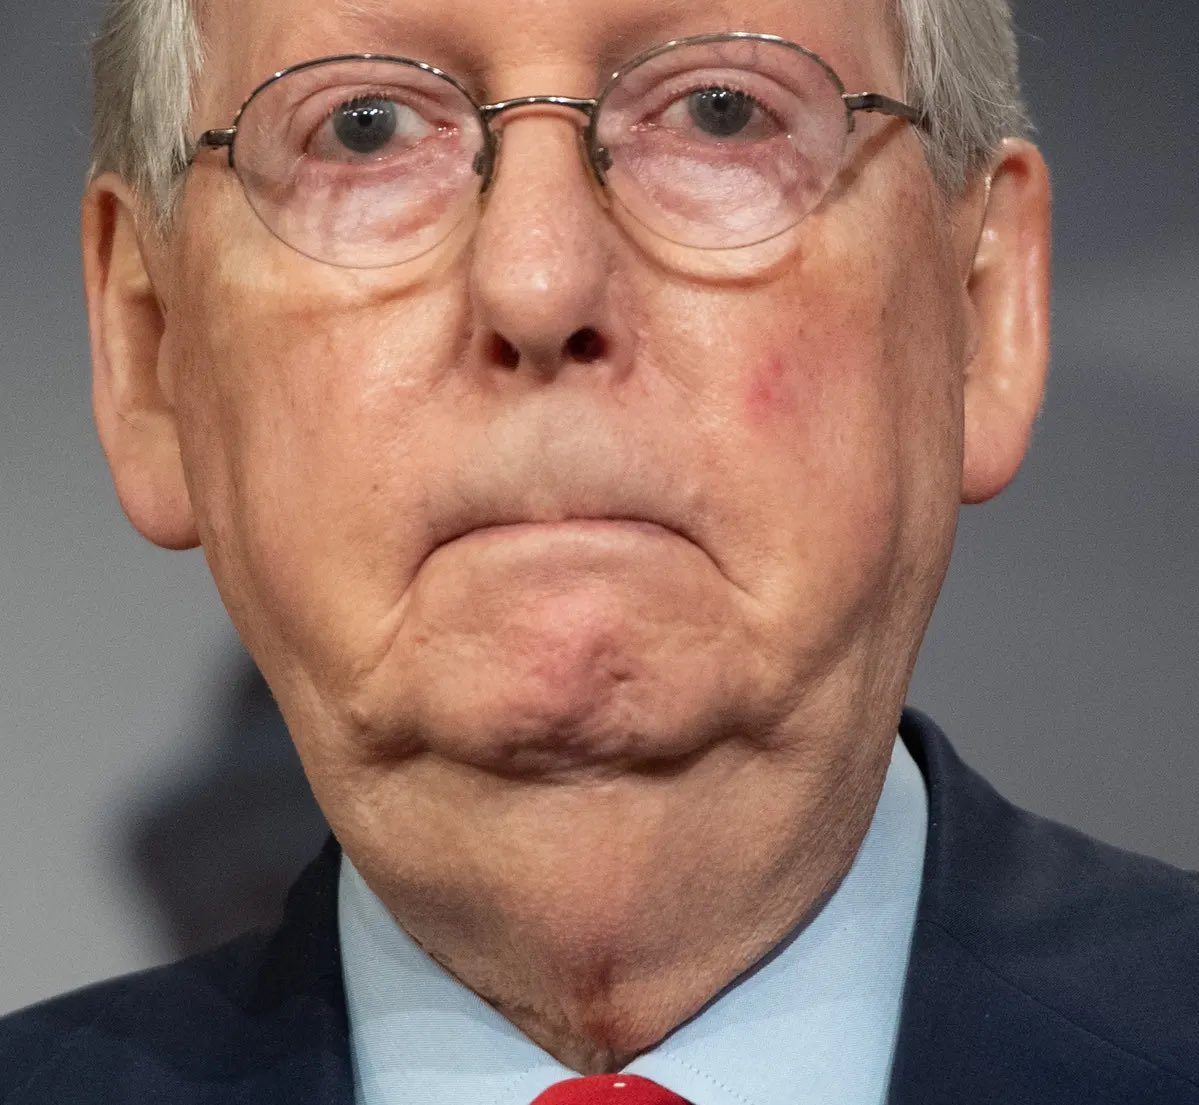 What does Mitch McConnell smell like?